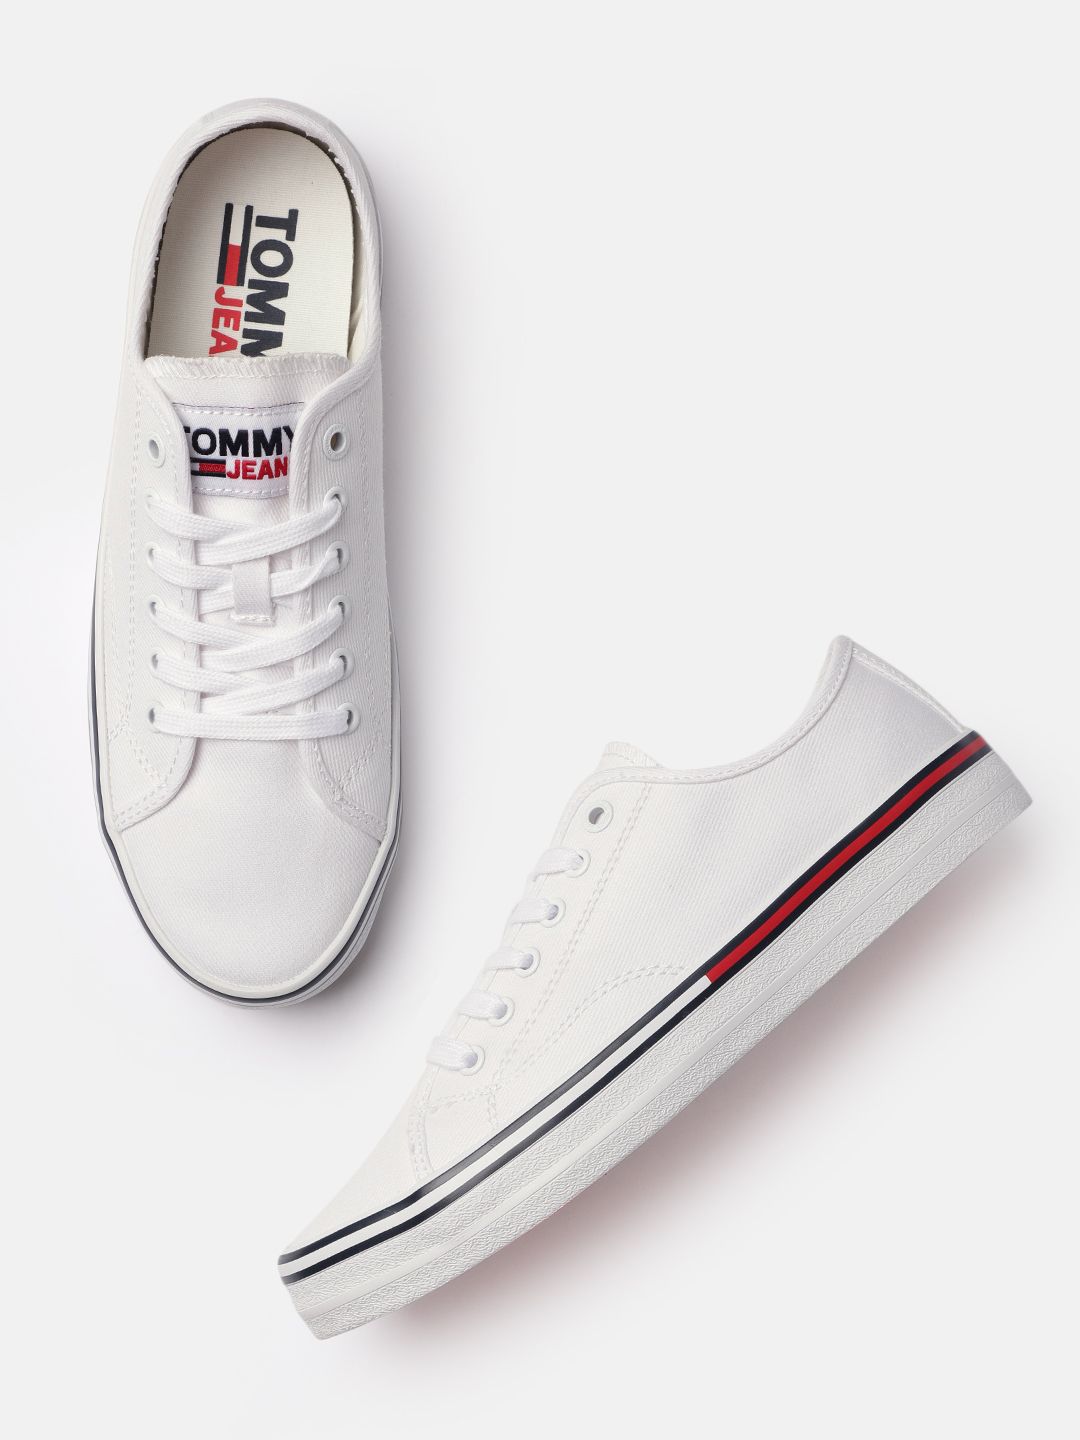 Tommy Hilfiger Women White ESSENTIAL Sneakers Price in India